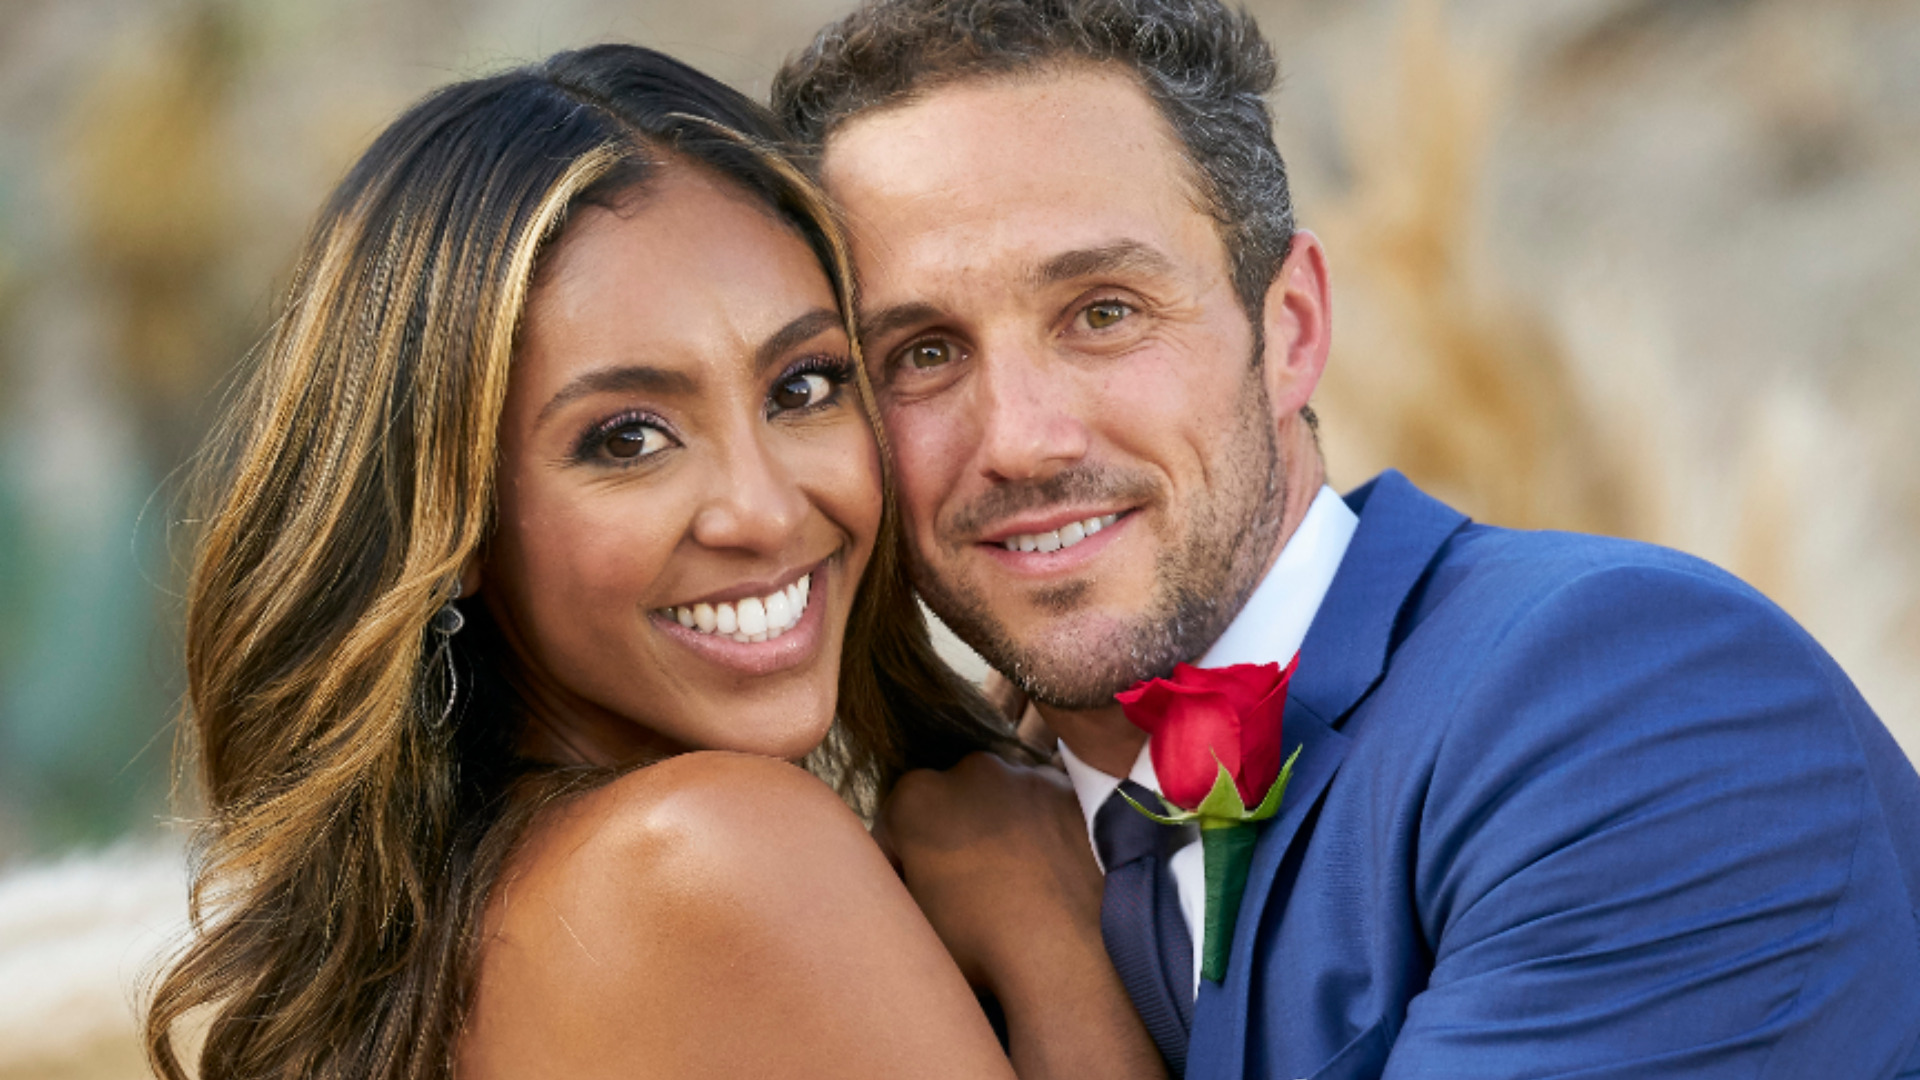 Tayshia Adams and Zac Clark pose together after getting engaged in ‘The Bachelorette’ Season 16 finale